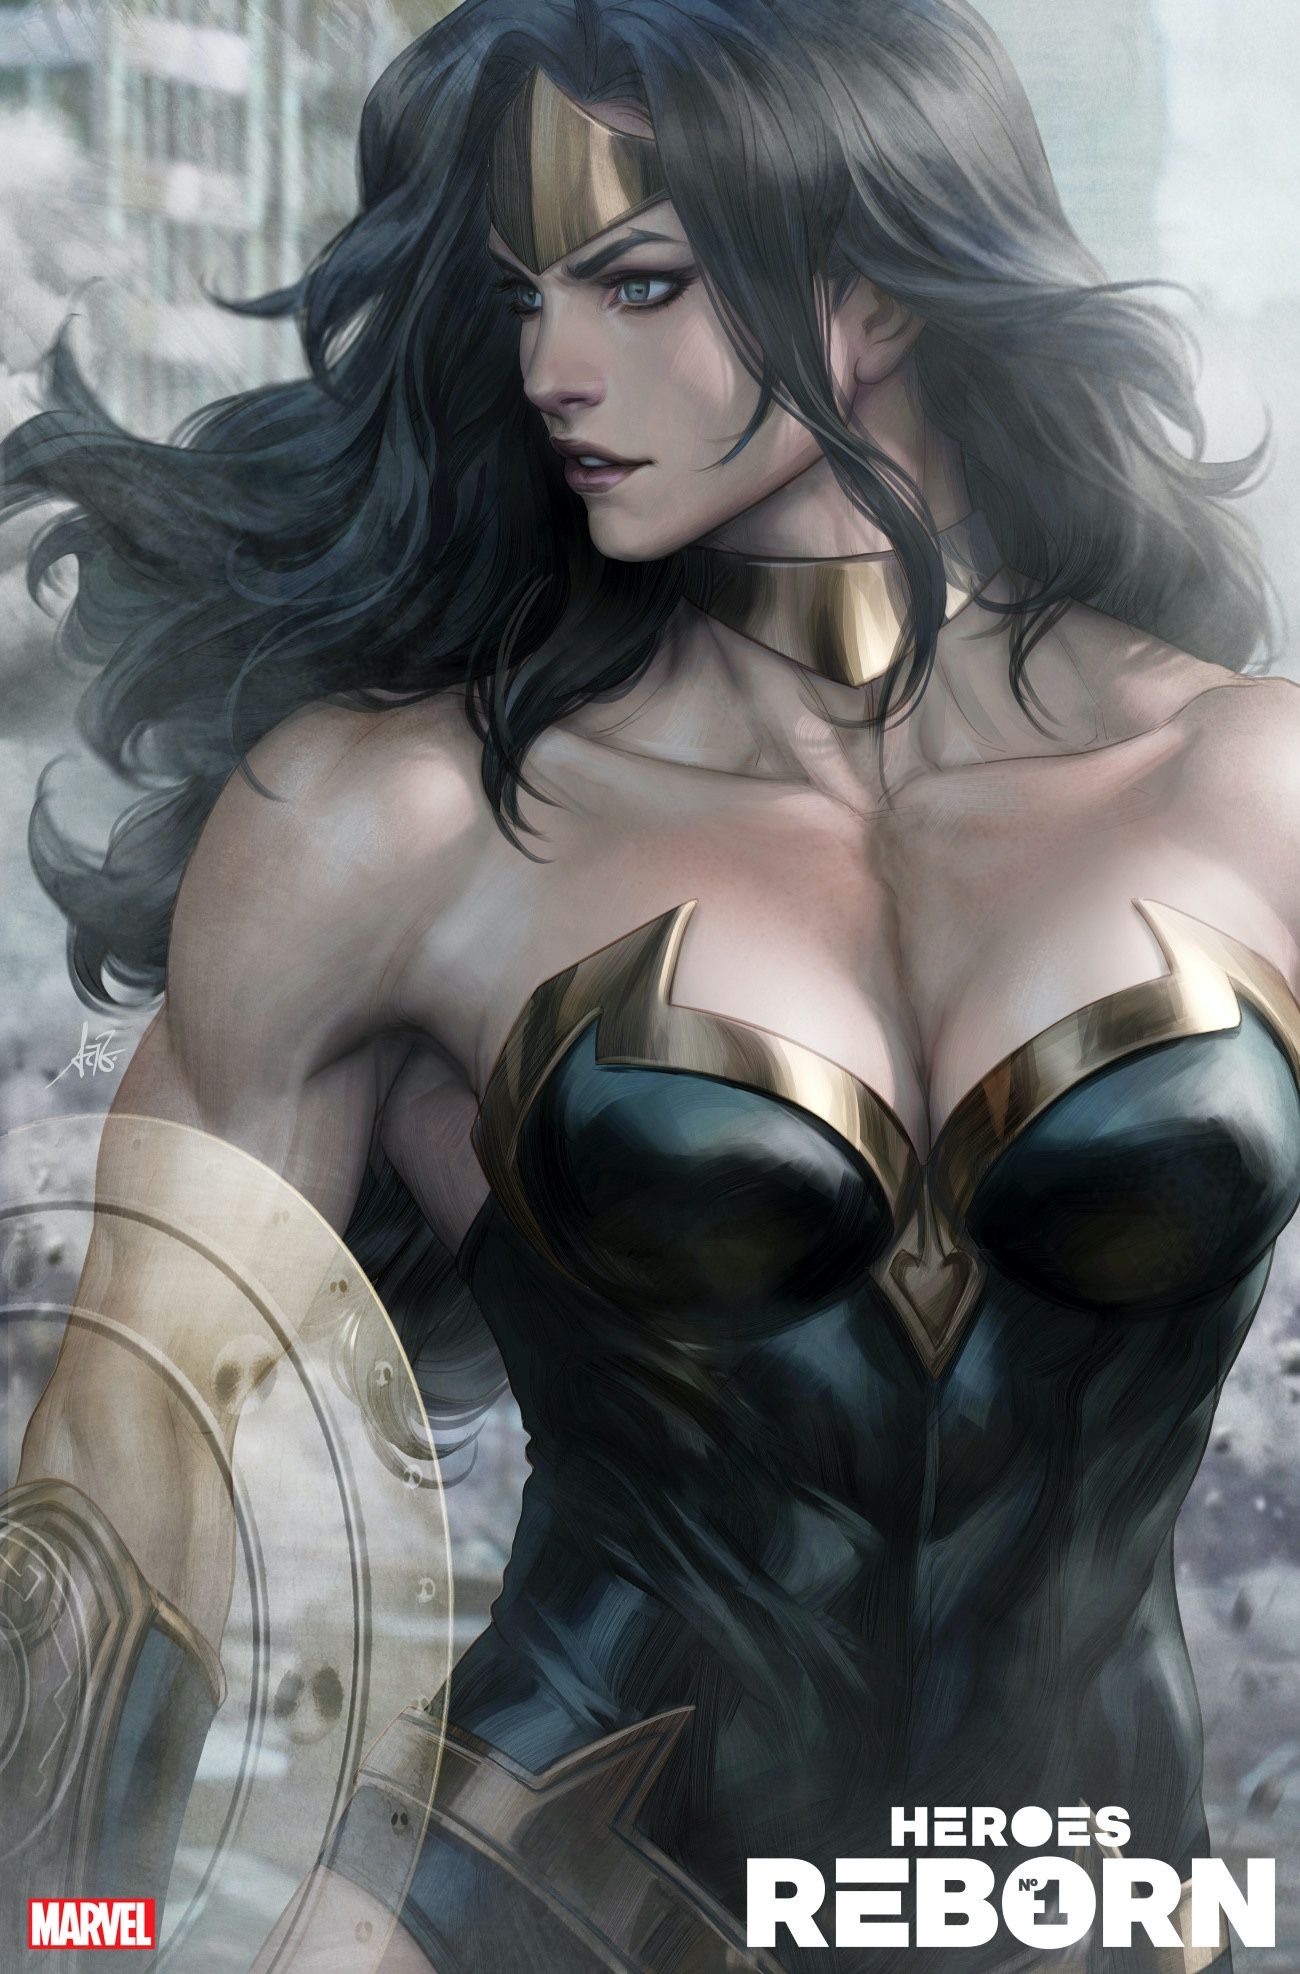 Marvel’s Version of Wonder Woman Shines in New Comic Cover